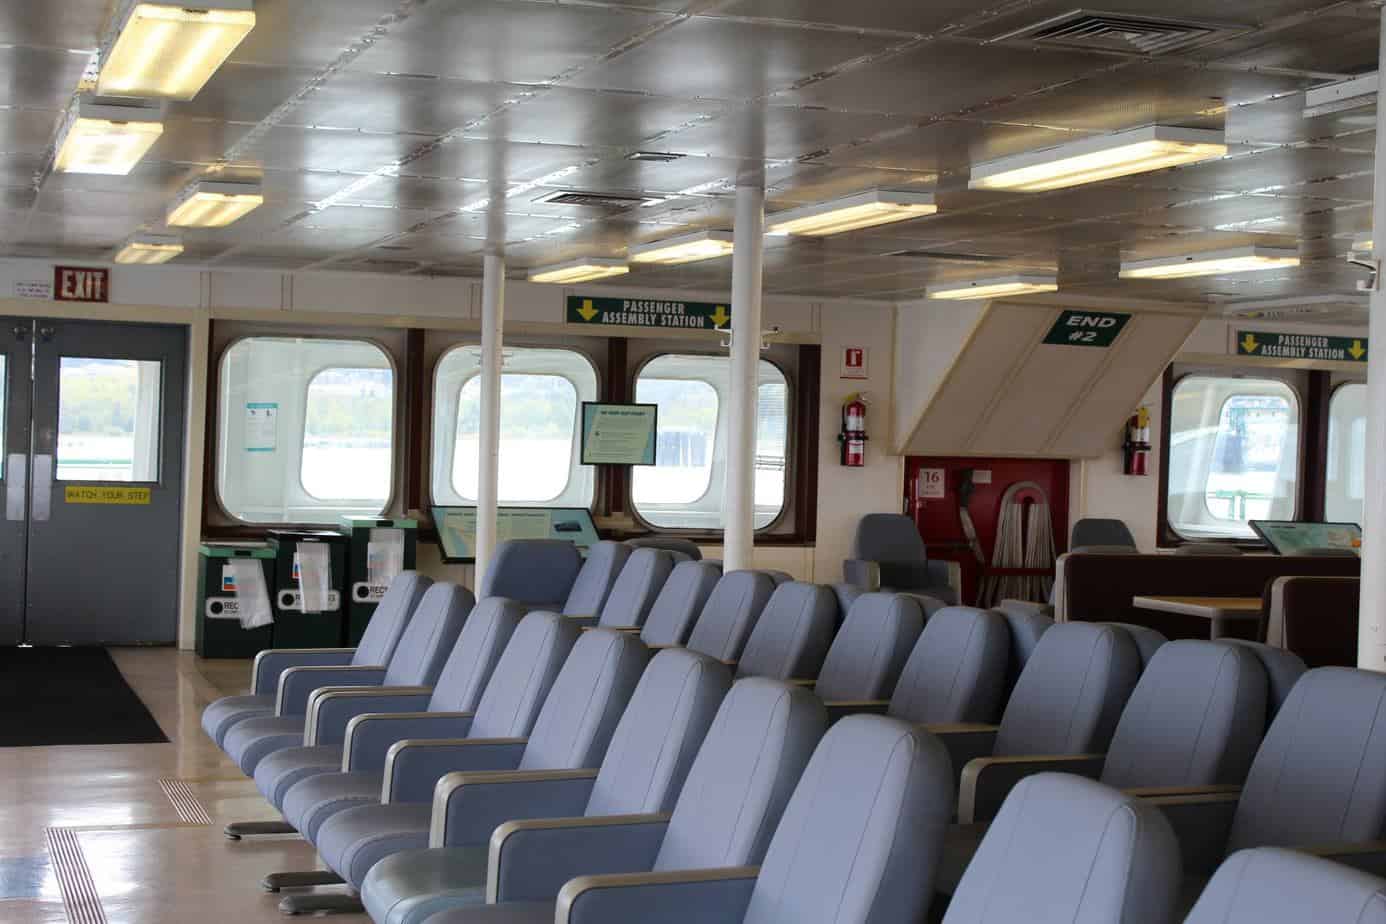 Inside ferry- rows of chairs and rounded square windows in the background